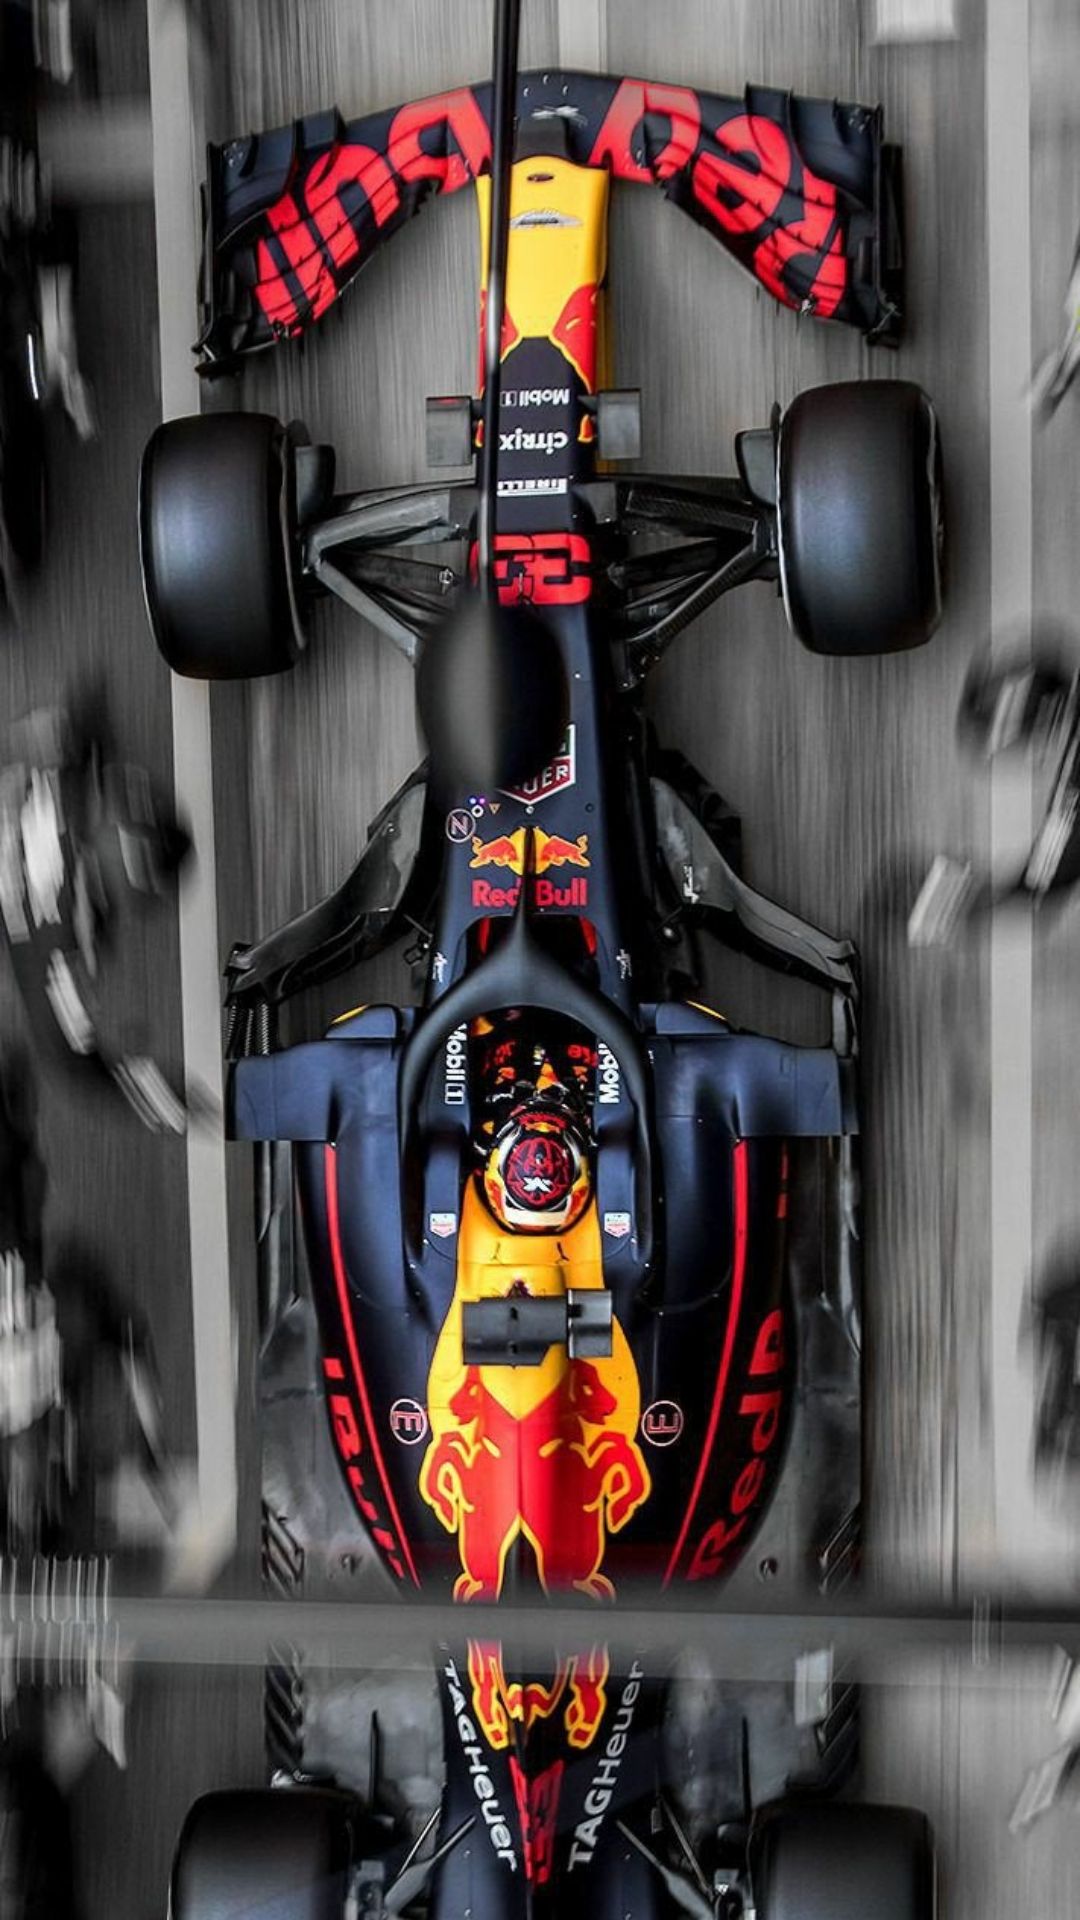 Red Bull F1 Racing Wallpapers - Top 30 Best Red Bull F1 Racing Wallpapers  Download